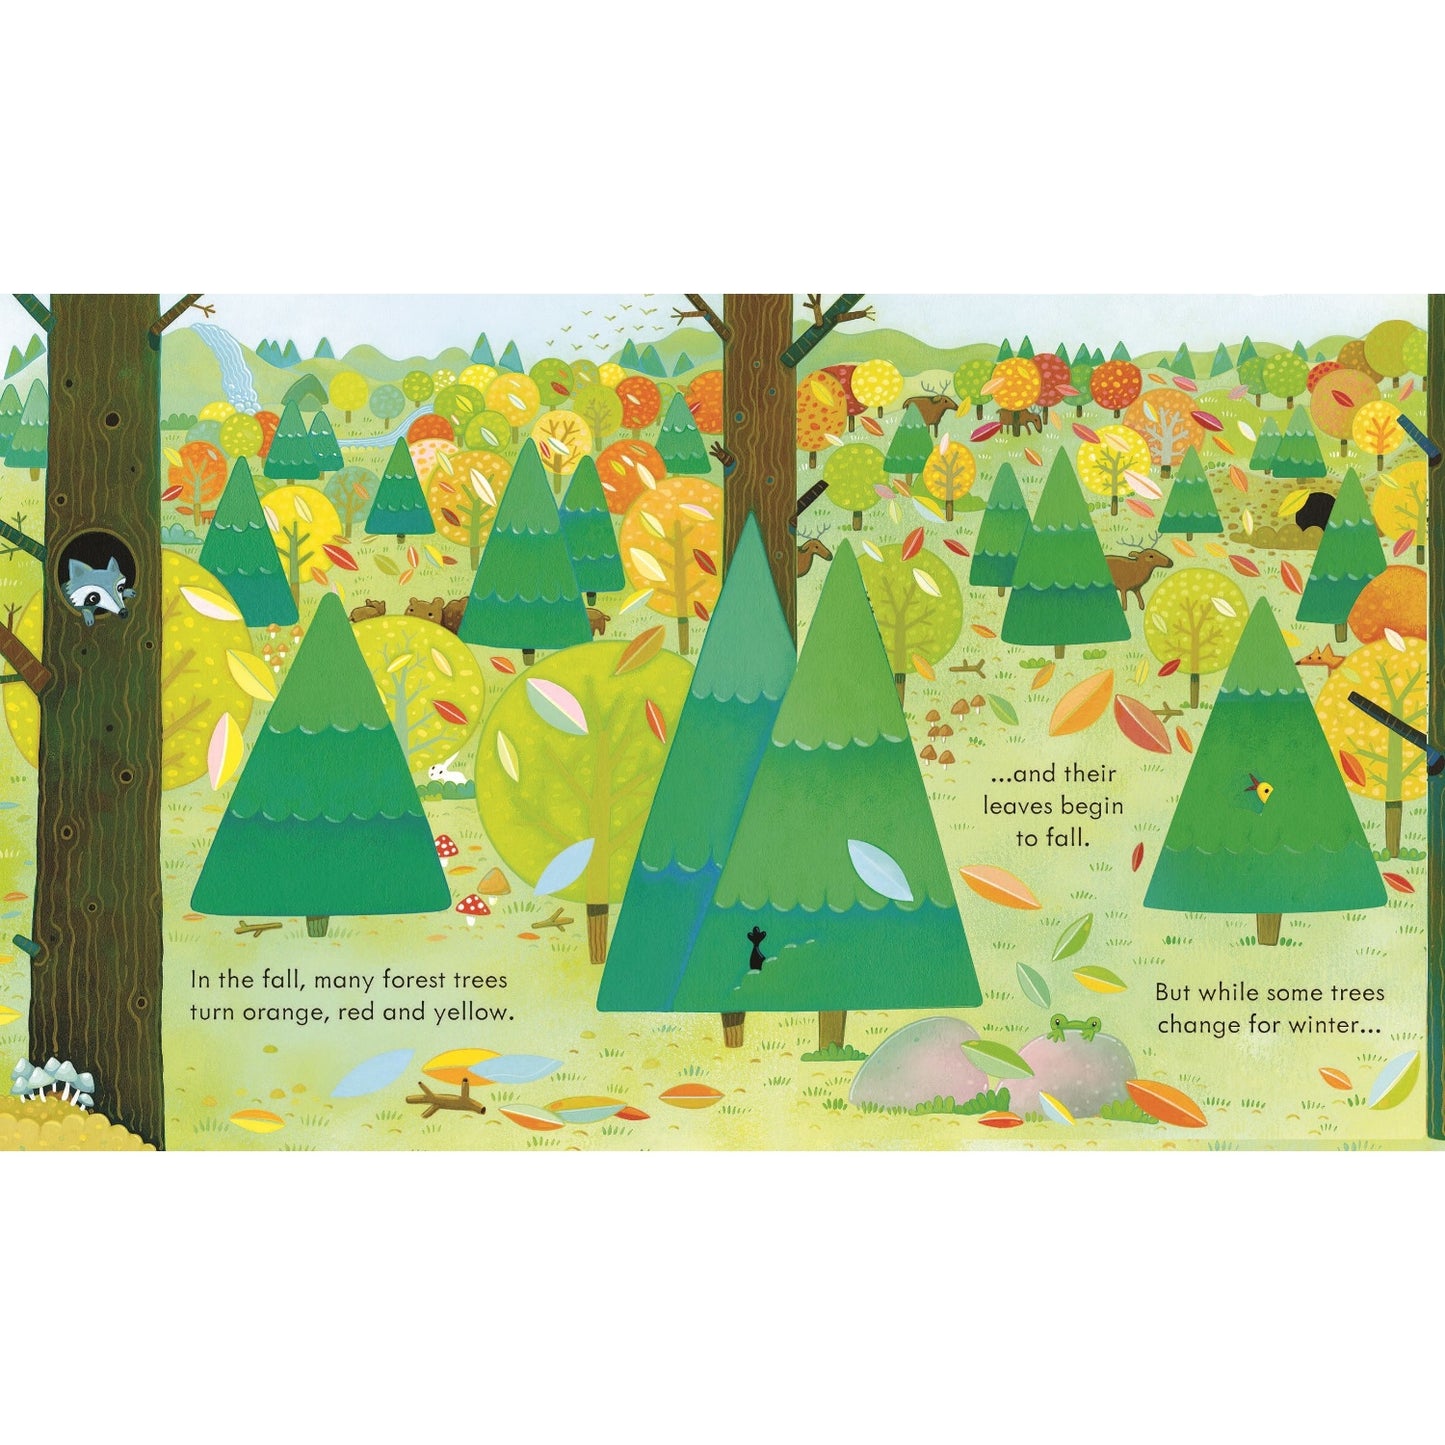 Peep Inside a Forest | Children's Book on Nature